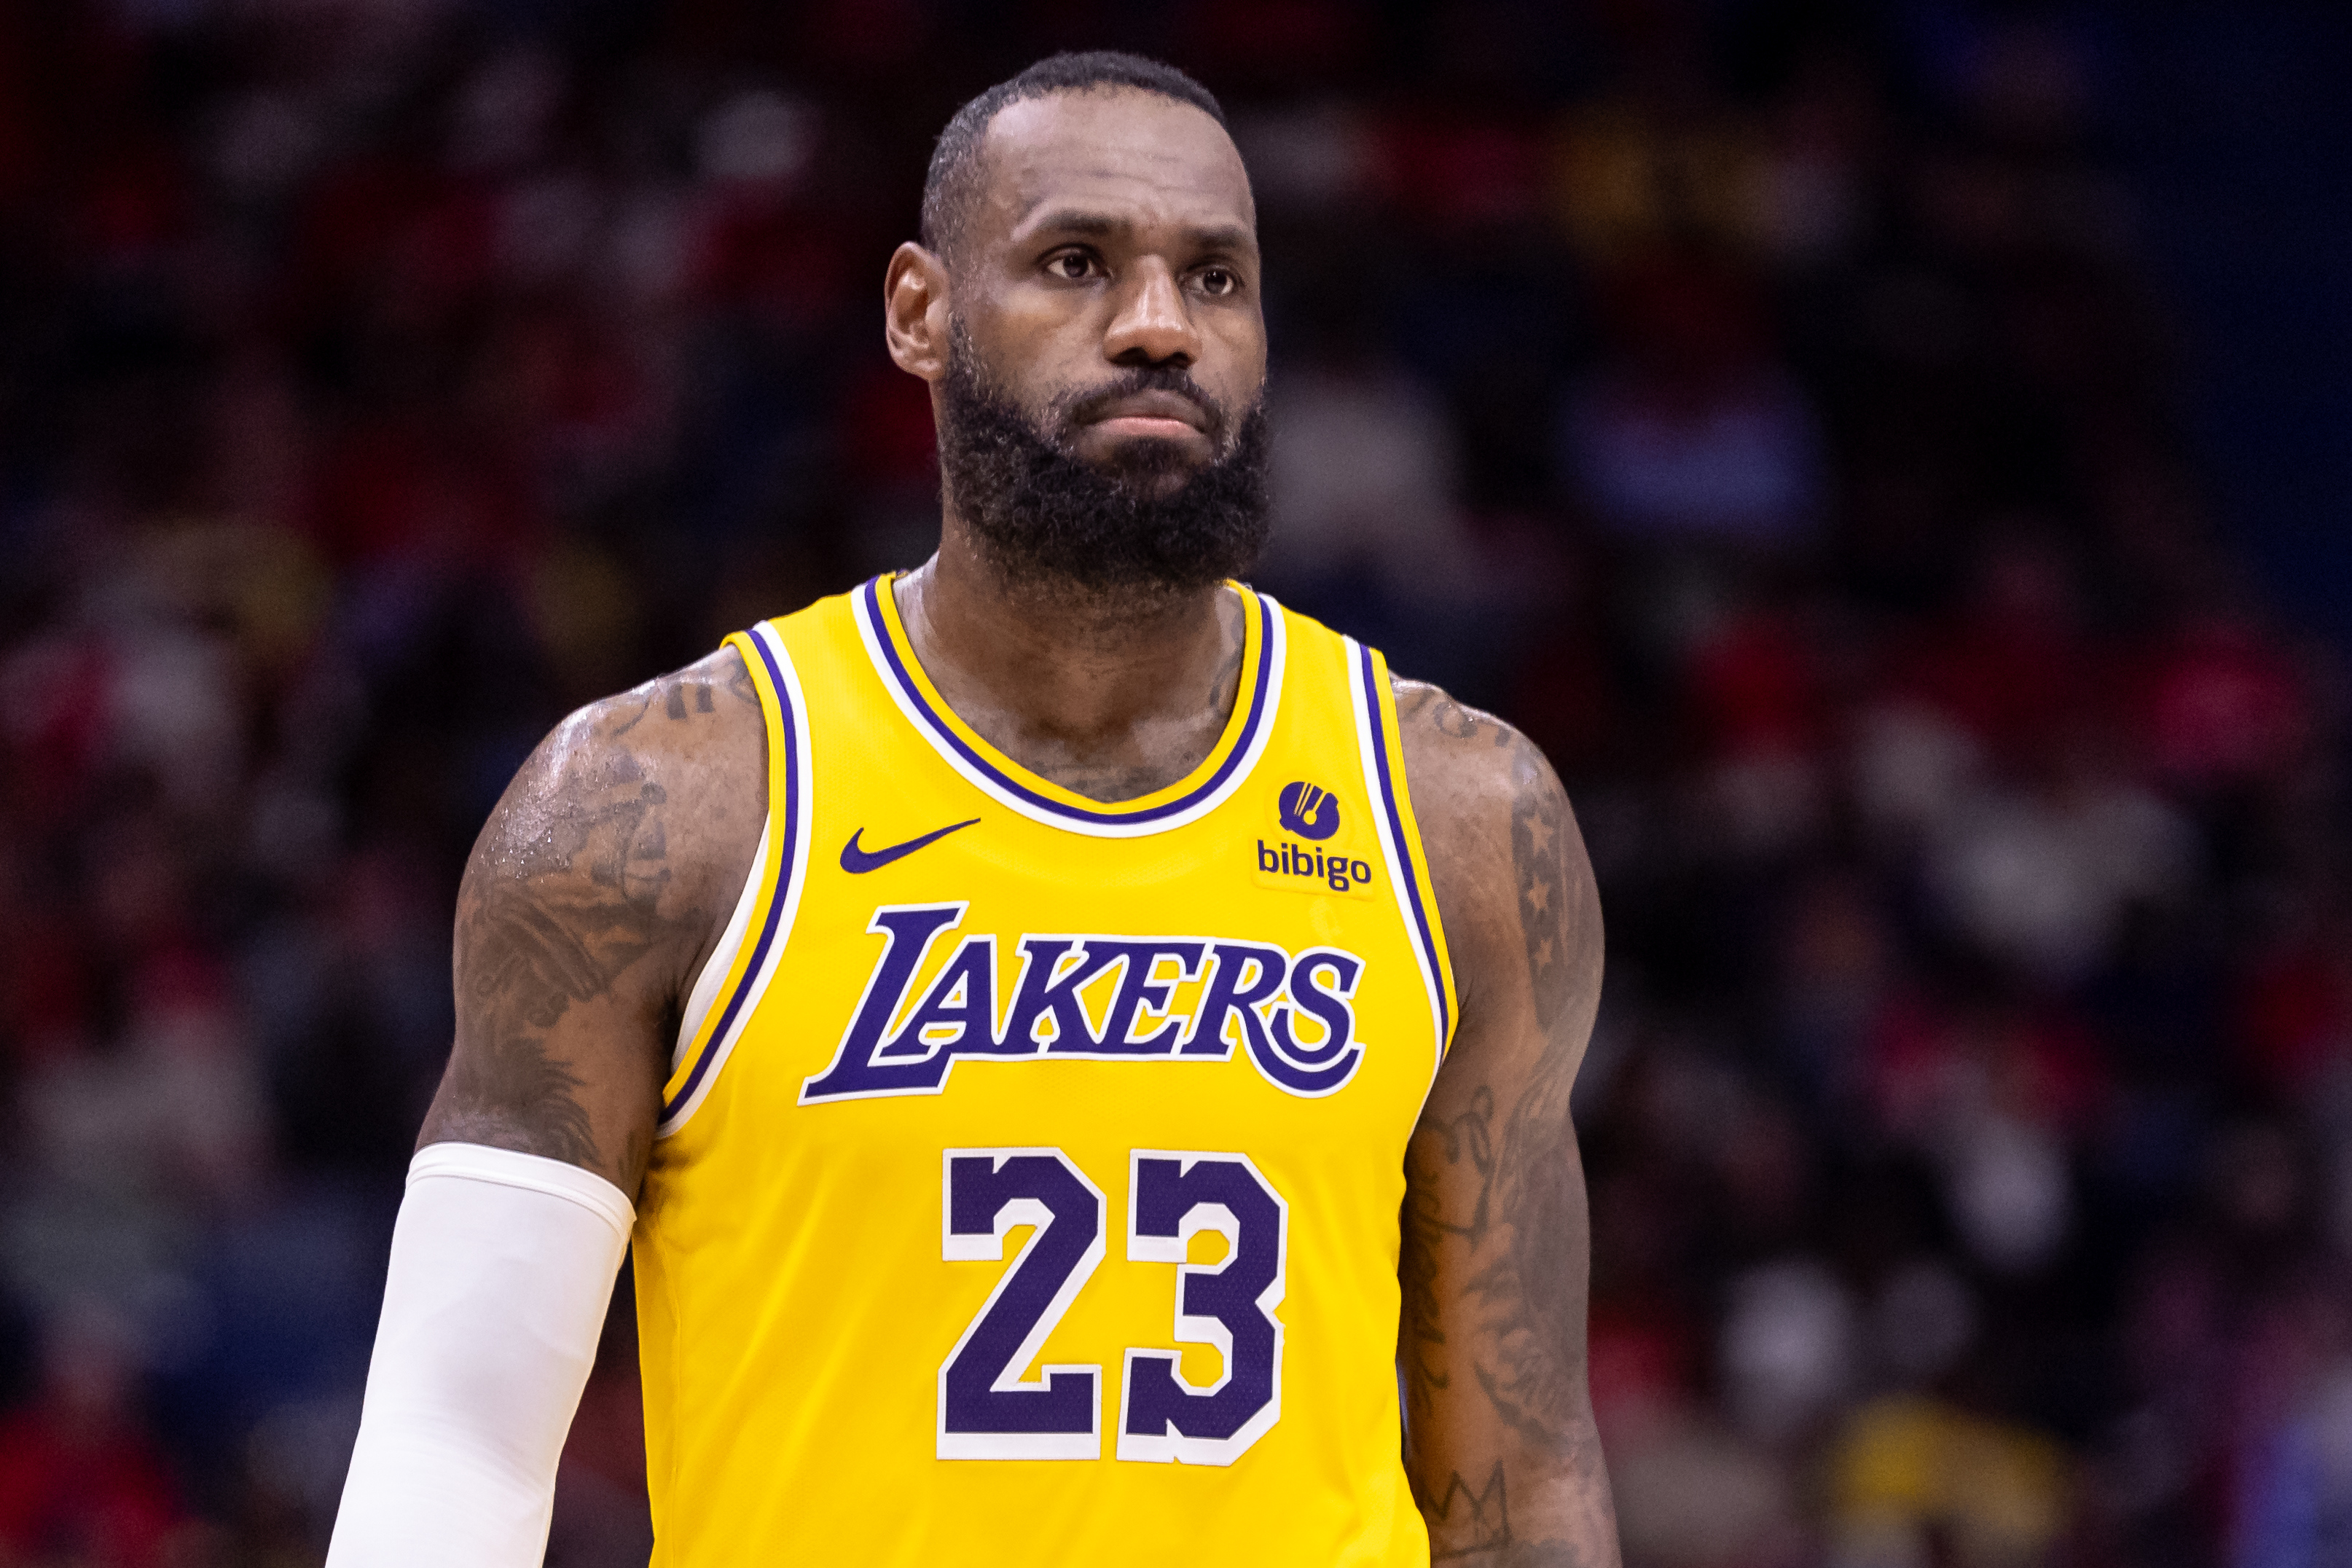 Update on LeBron James role in Los Angeles Lakers head coach search